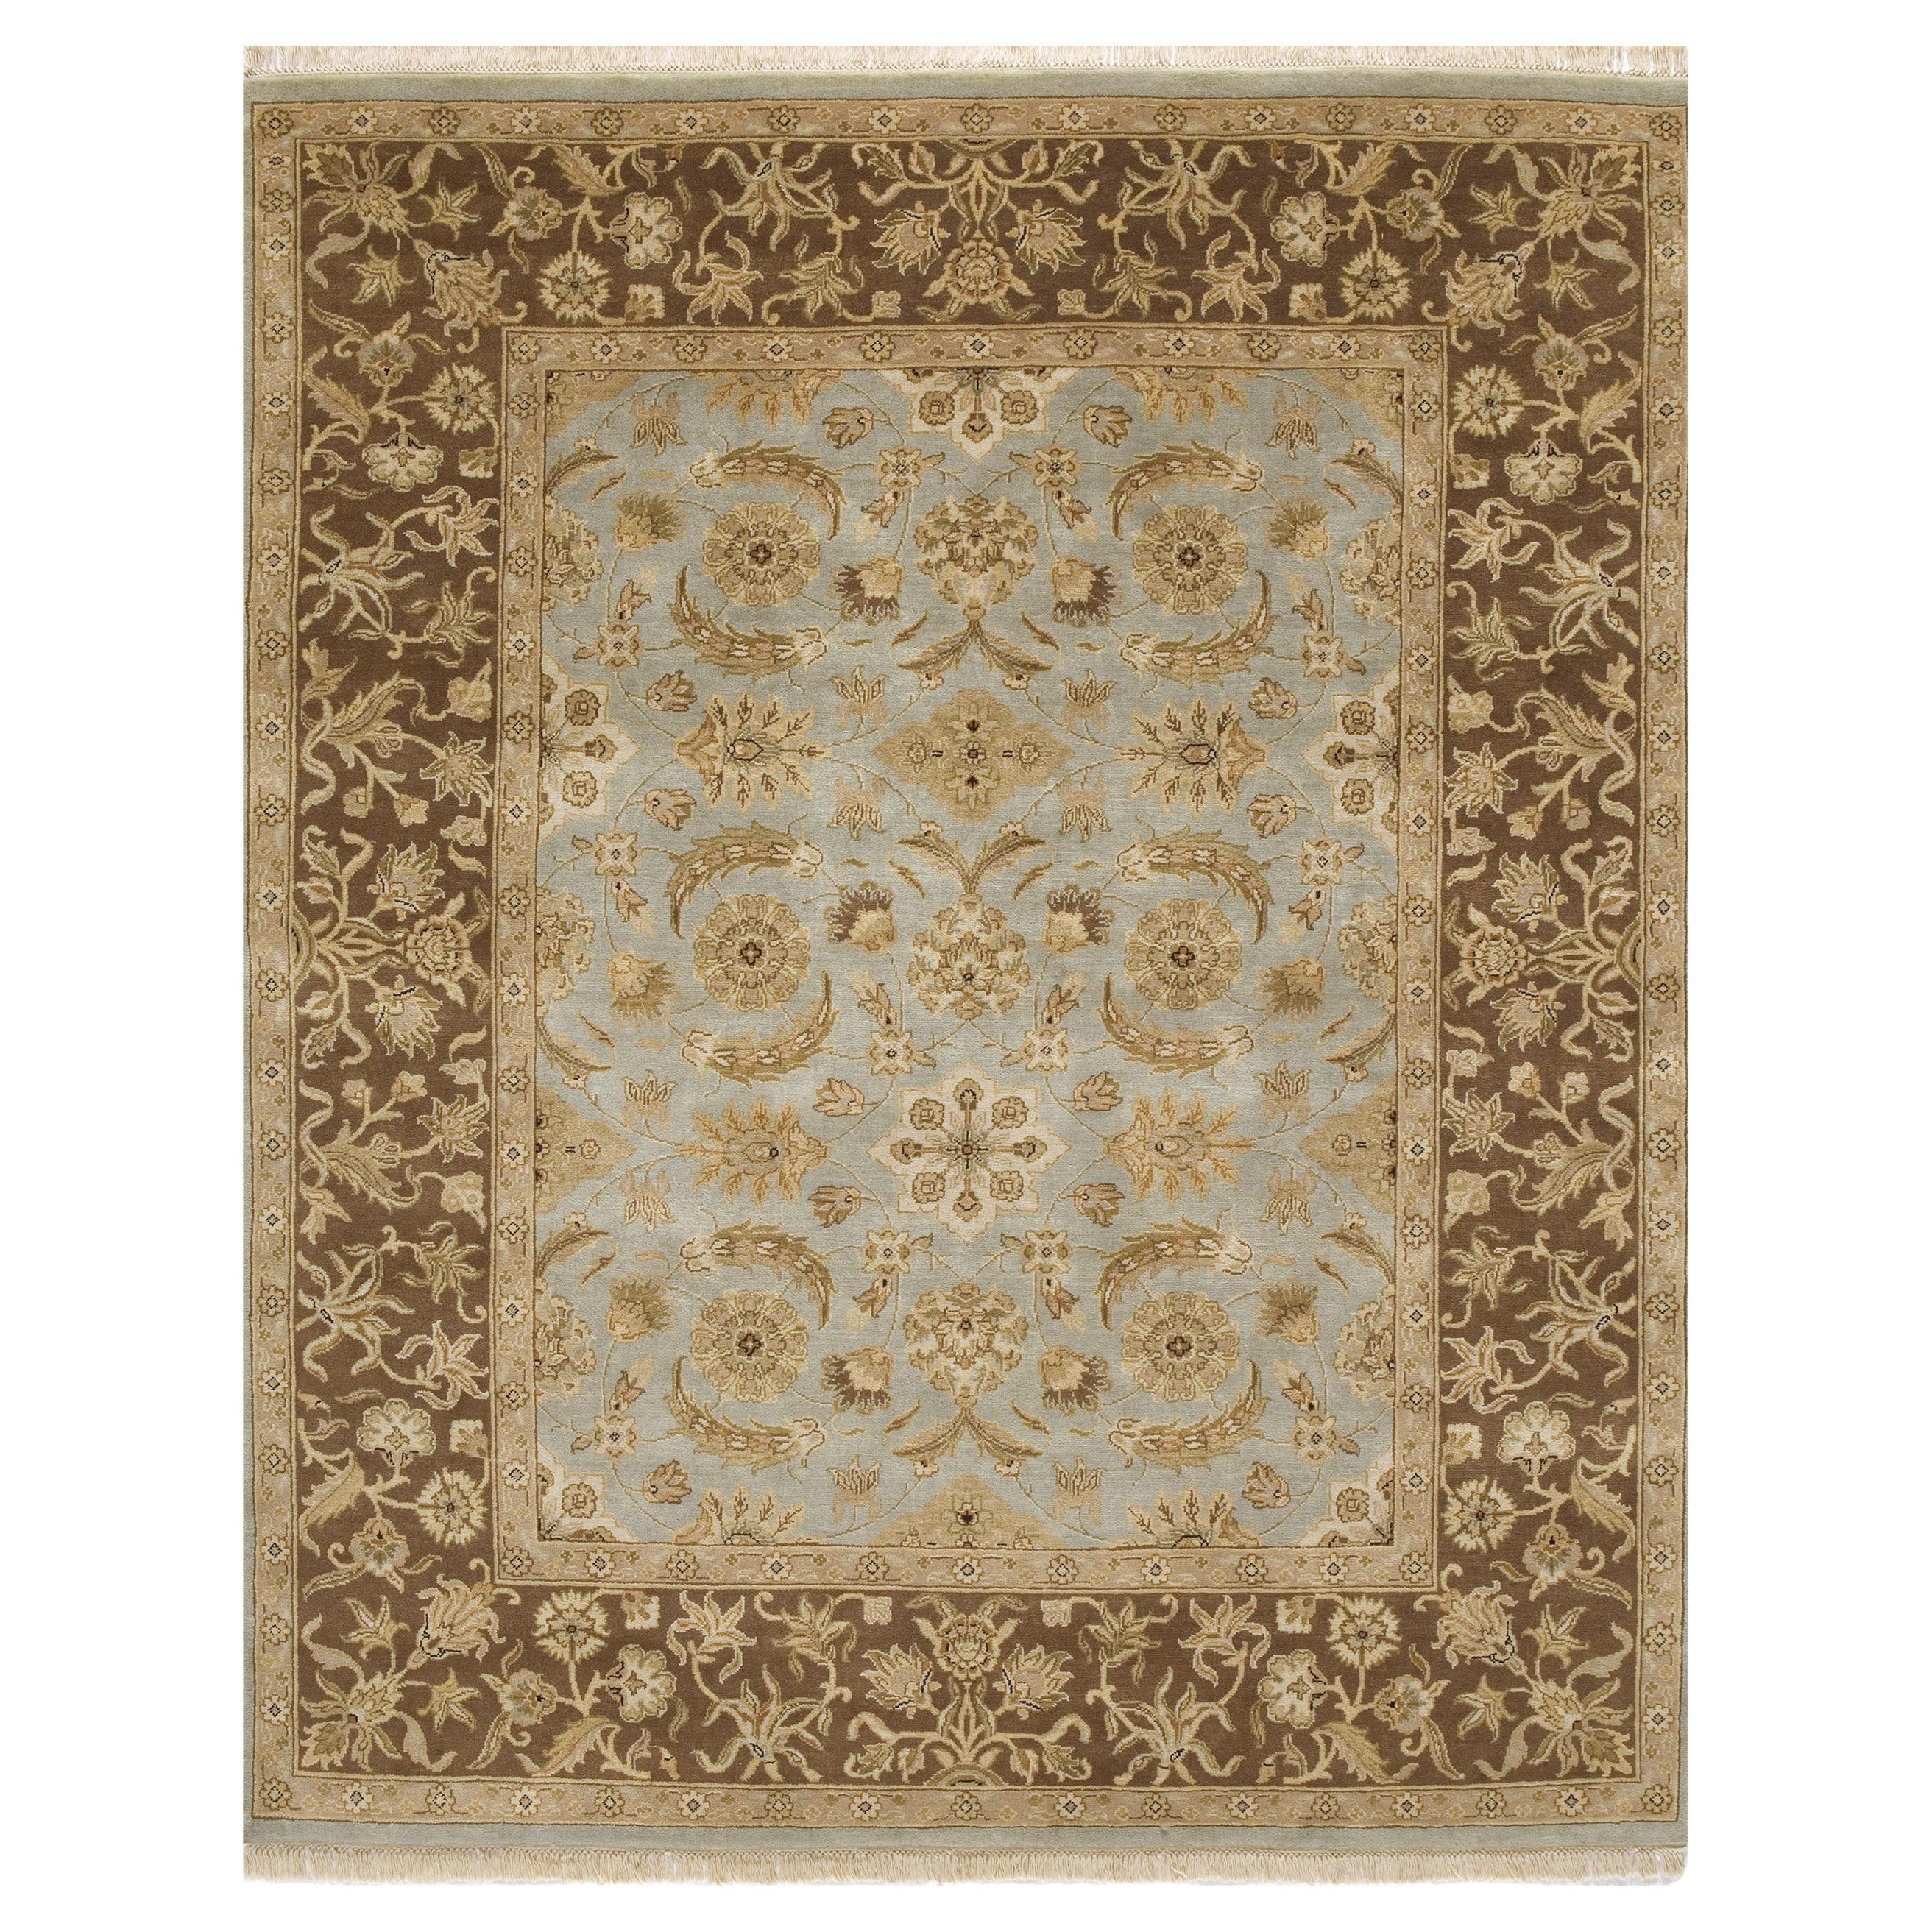 Luxury Traditional Hand-Knotted Mogul Light Blue and Brown 12x18 Rug